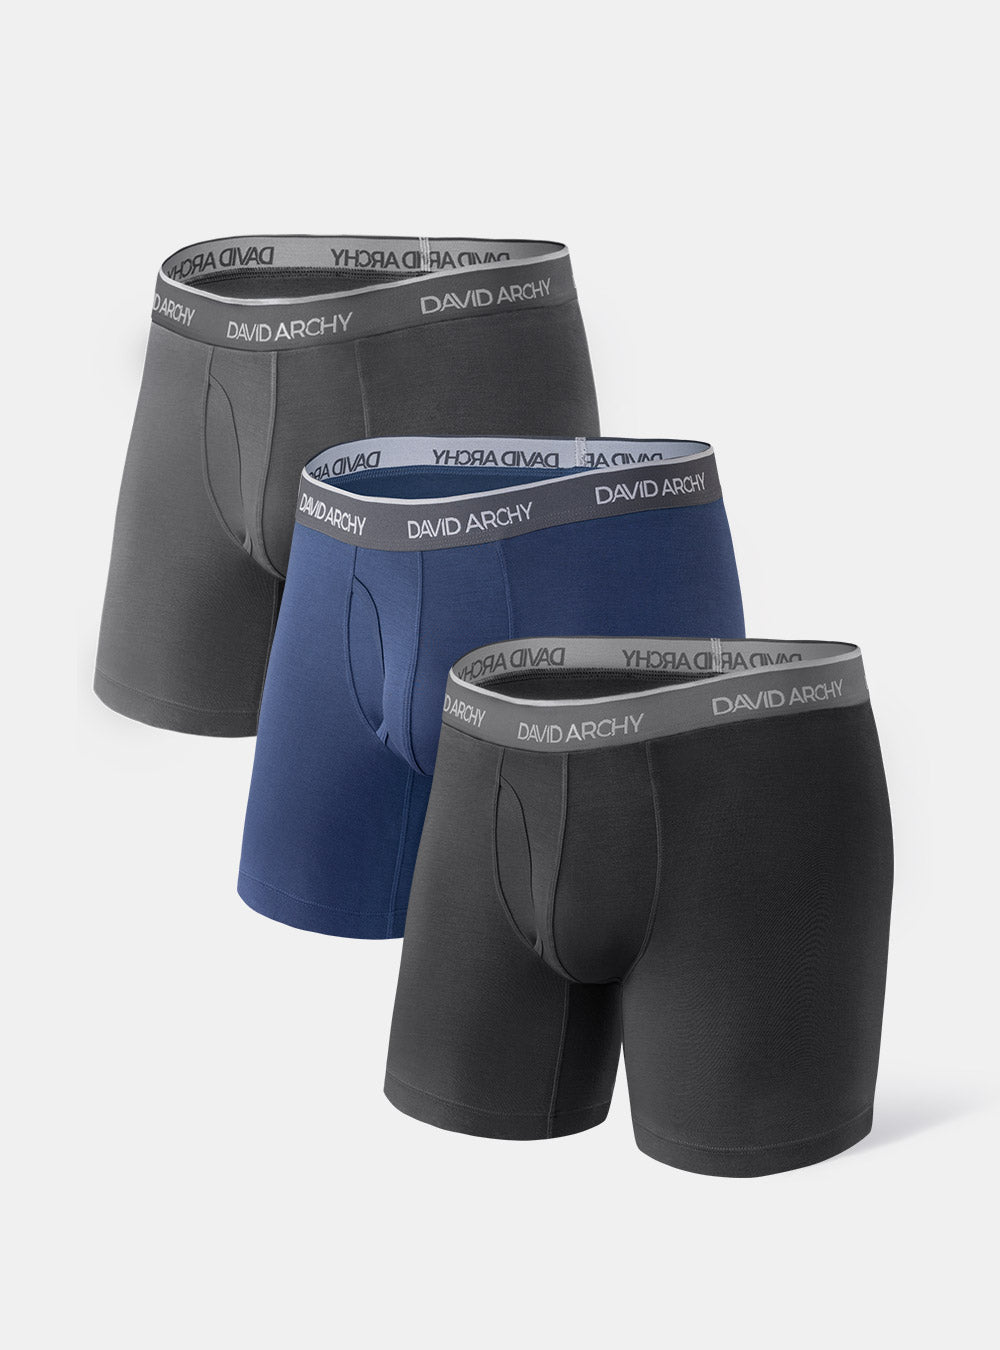 Anti Bacterial Breathable Men's Boxer Briefs Moisture-Wicking